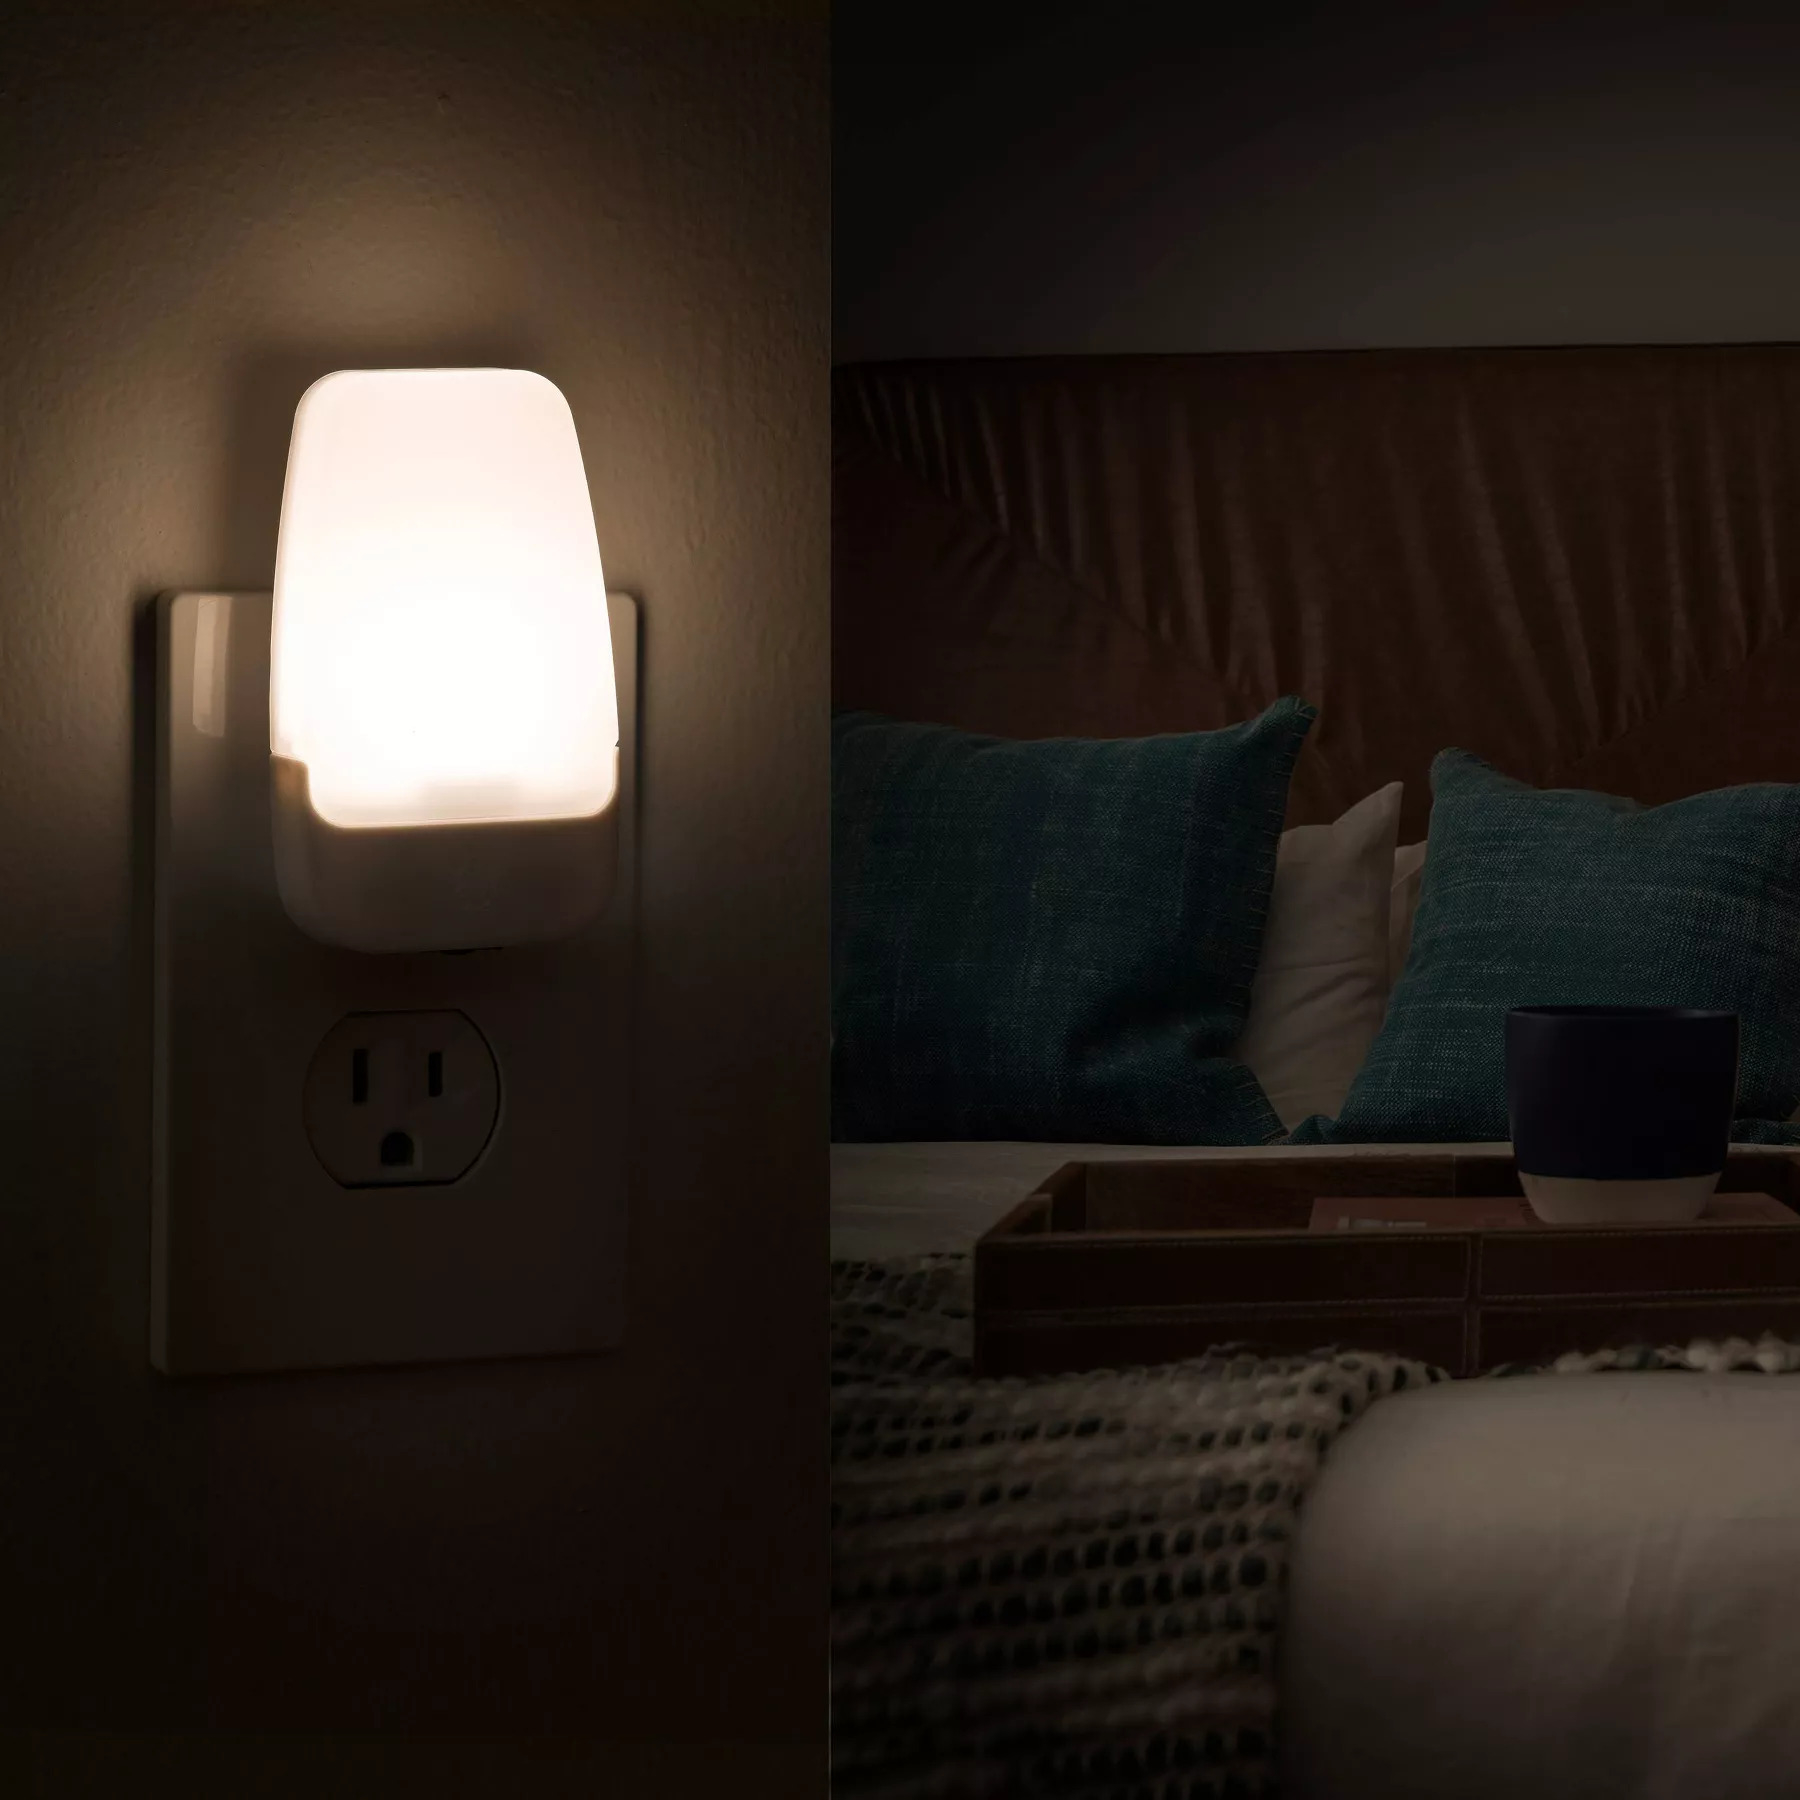 the night light plugged into an outlet